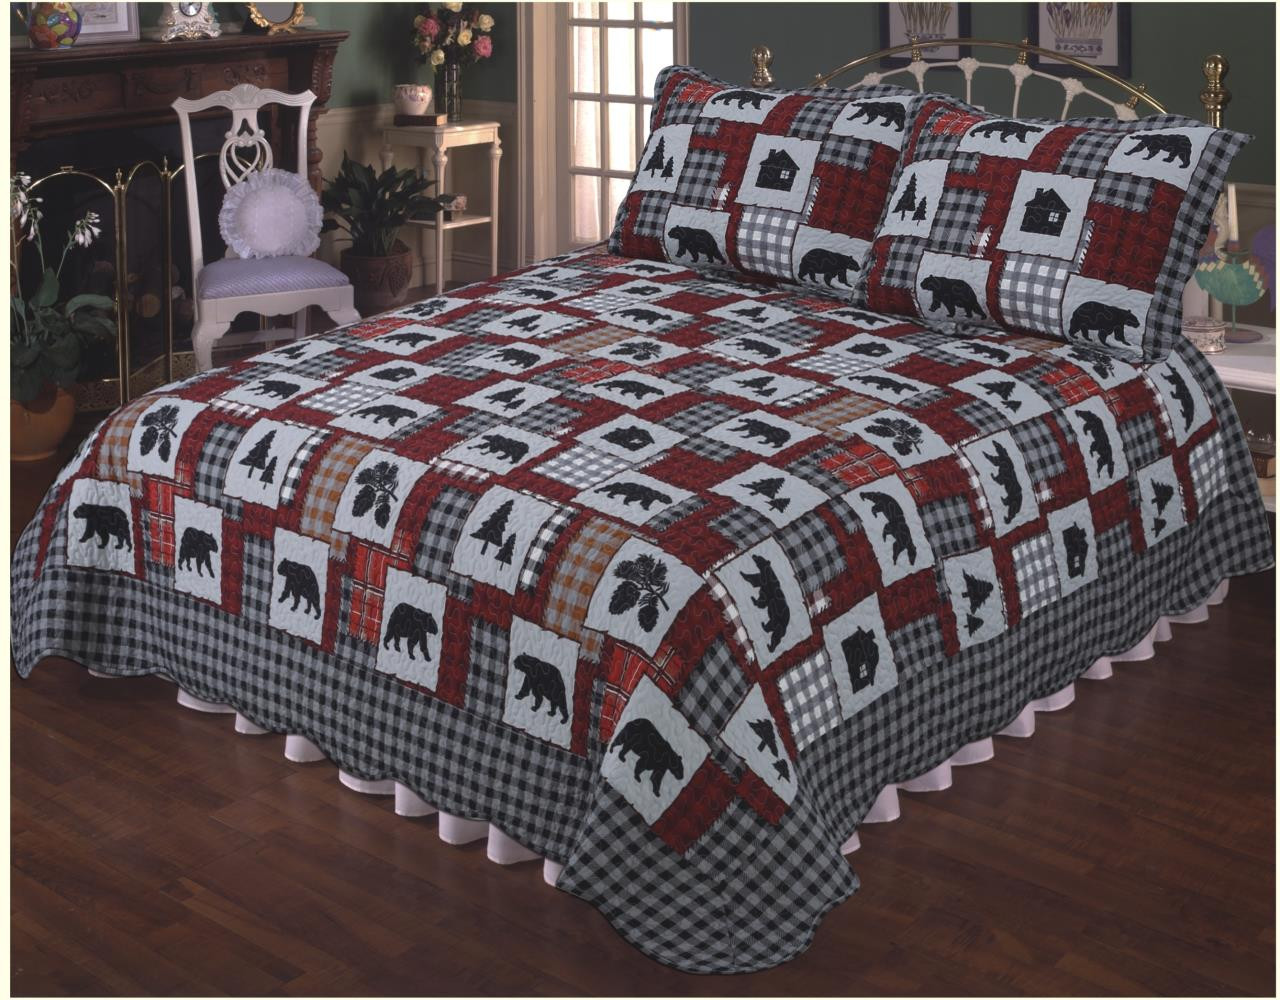 Huts & Bears Printed Quilt Collection -